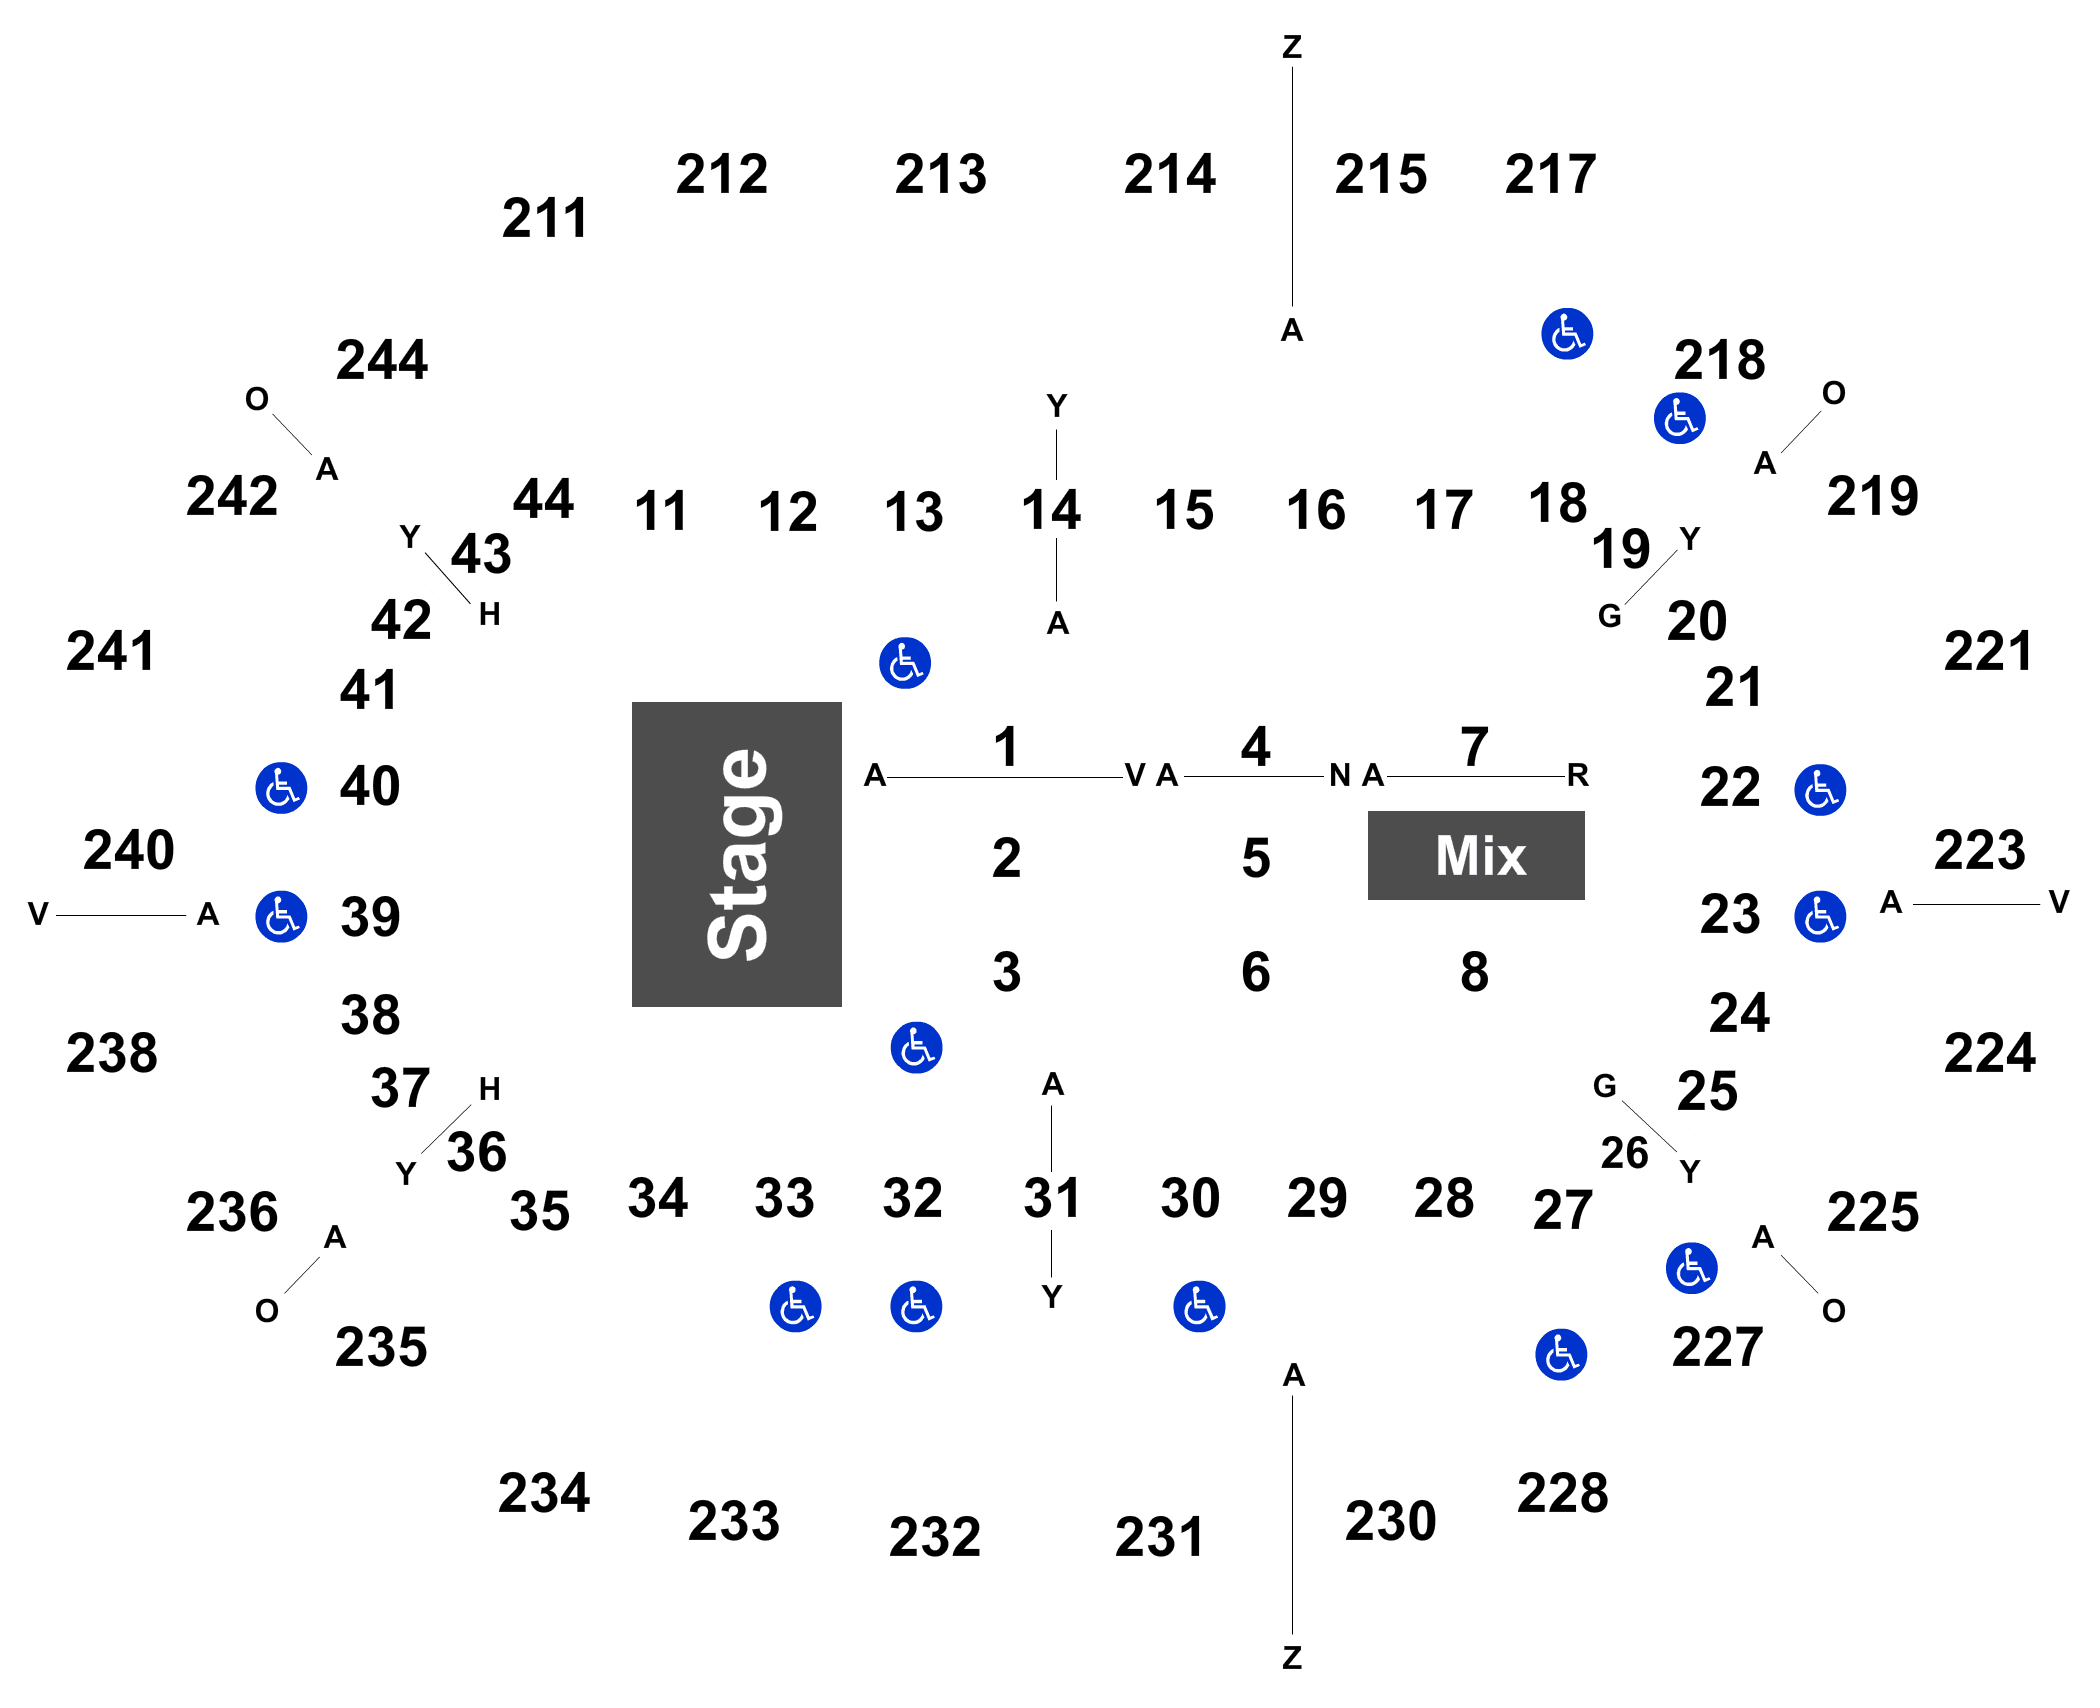 Rupp Arena Seating Chart Foo Fighters